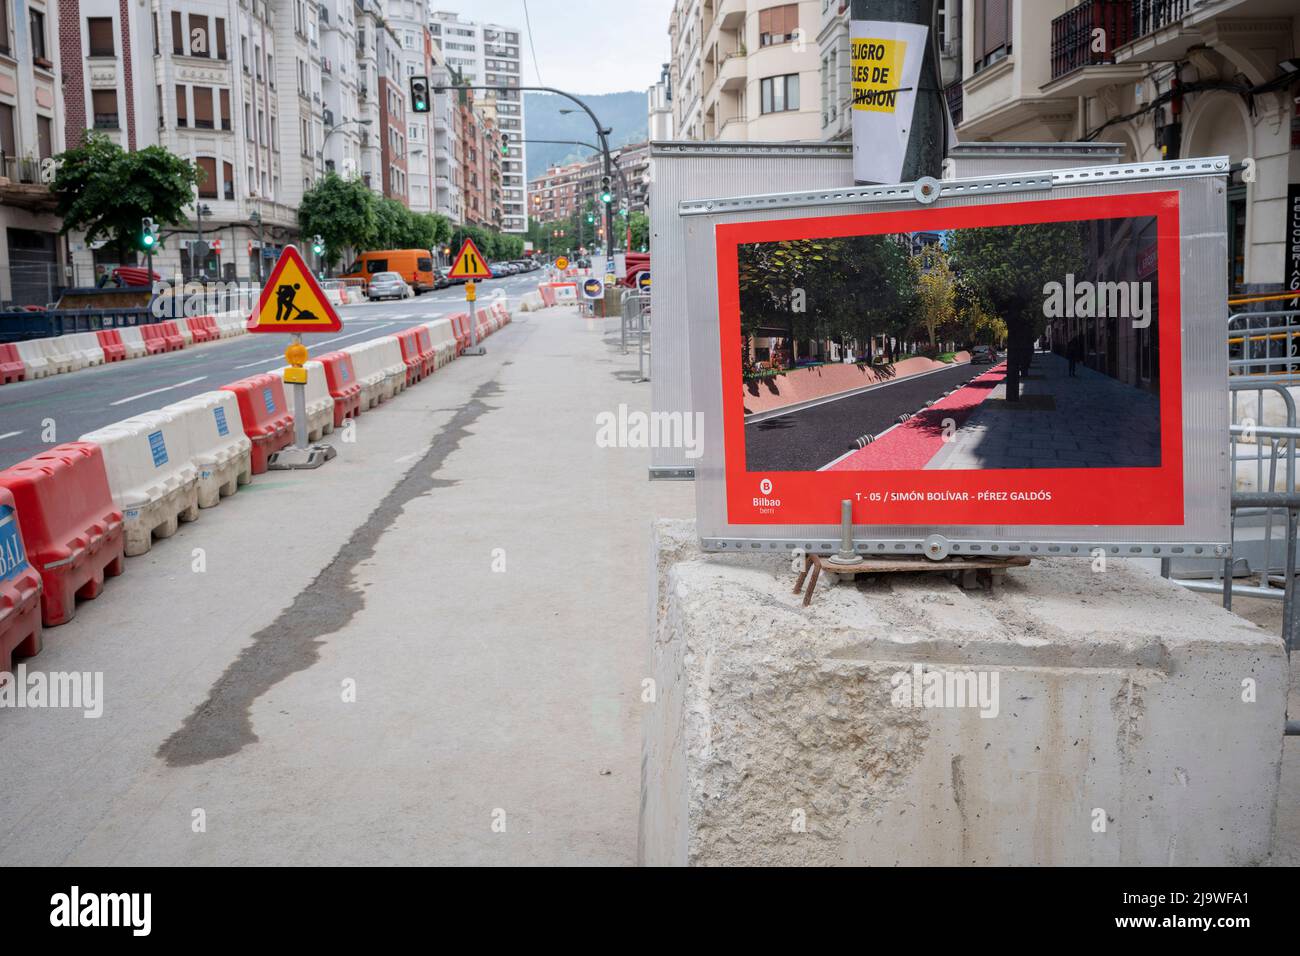 Street improvements are well underway on 'Maria Diaz Haroko Kalea' where pedestrian and cycling landscaping will improve Spanish lifestyle in central Bilbao, on 21st May 2022, in Bilbao, Cantabria, Spain. Stock Photo